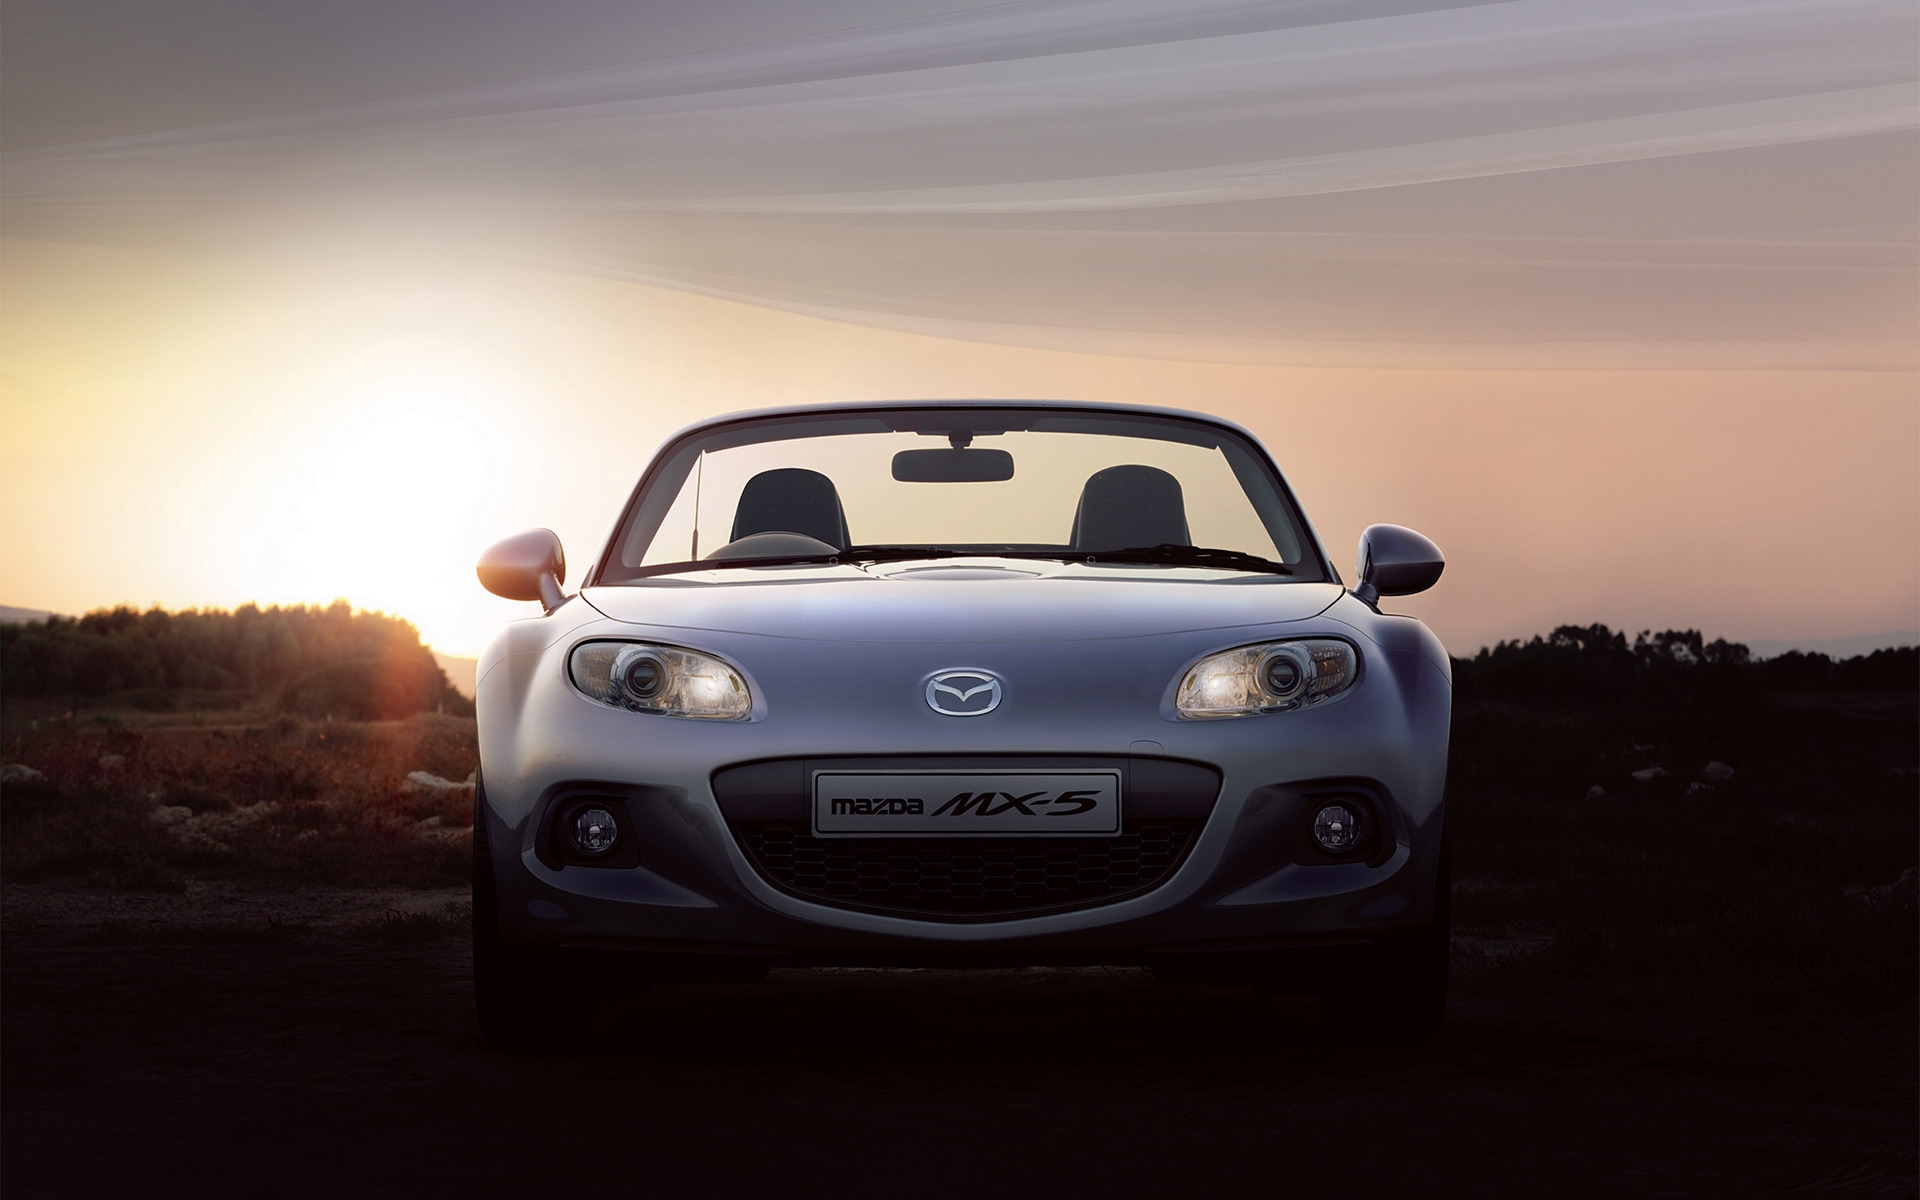 2013 Mazda MX 5 Roadster for 1920 x 1200 widescreen resolution